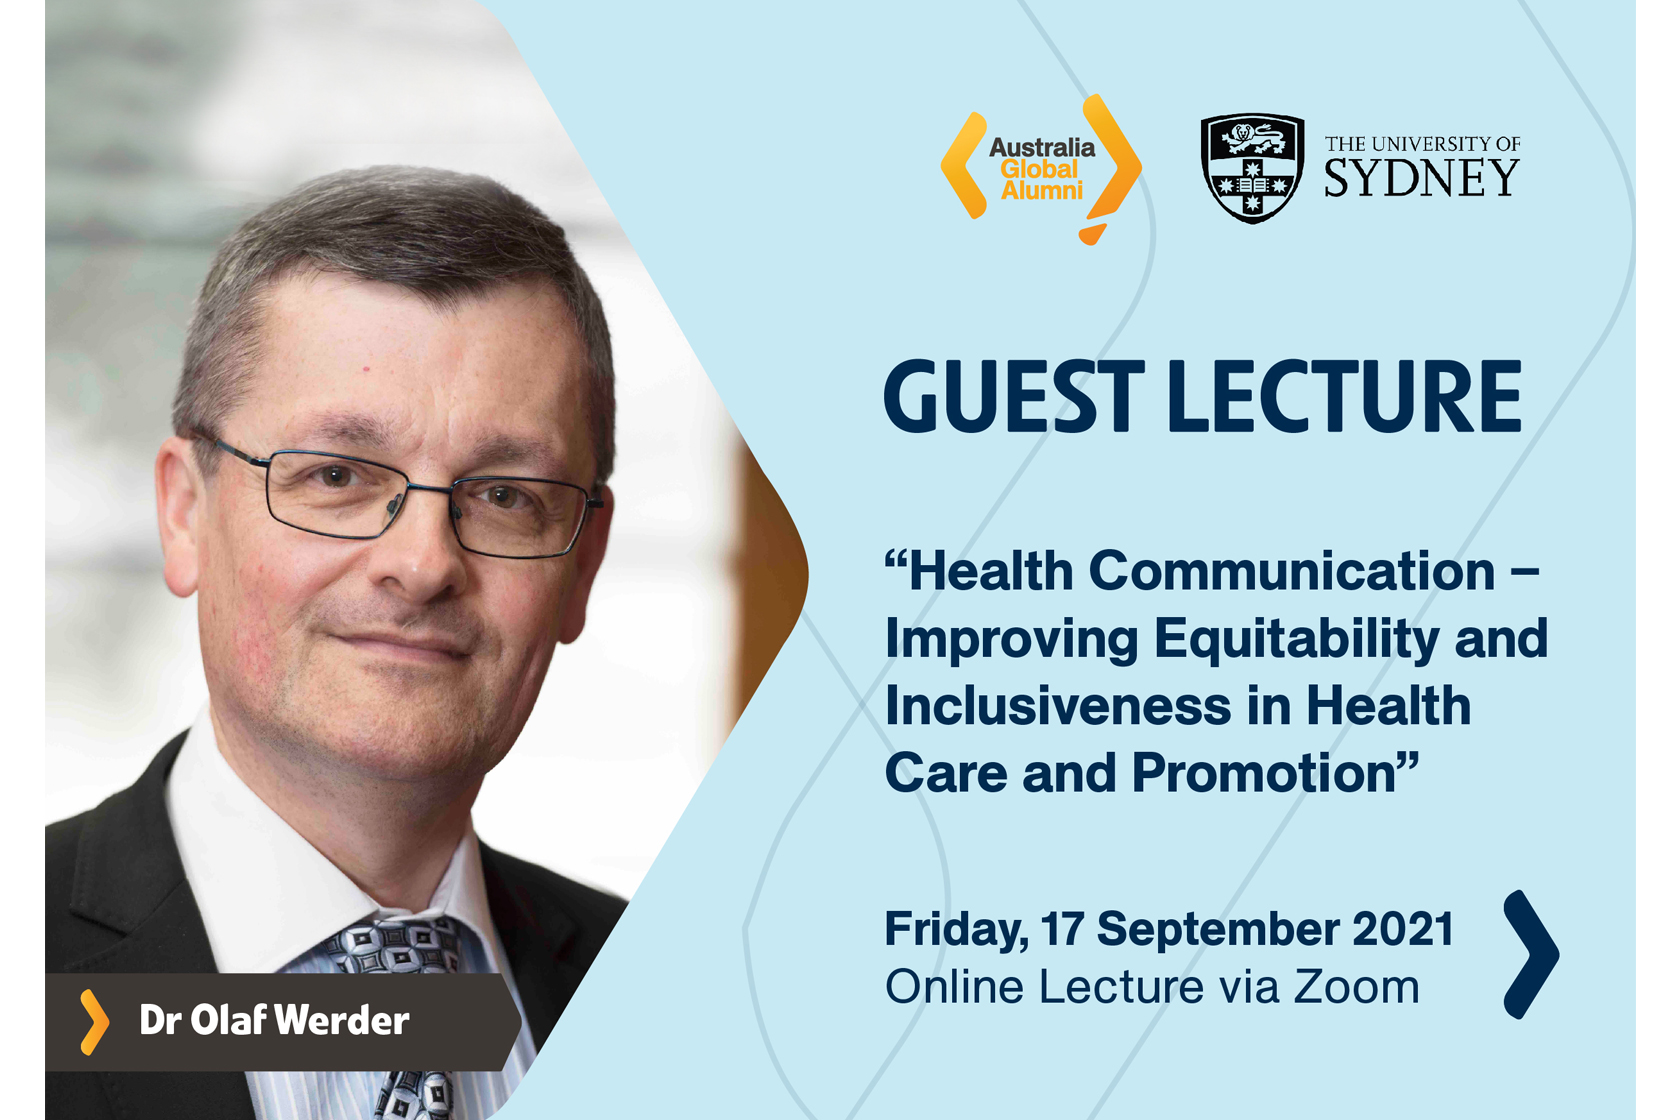 Join us in the Guest Lecture on " Health Communication – Improving Equitability and Inclusiveness in Health Care and Promotion"